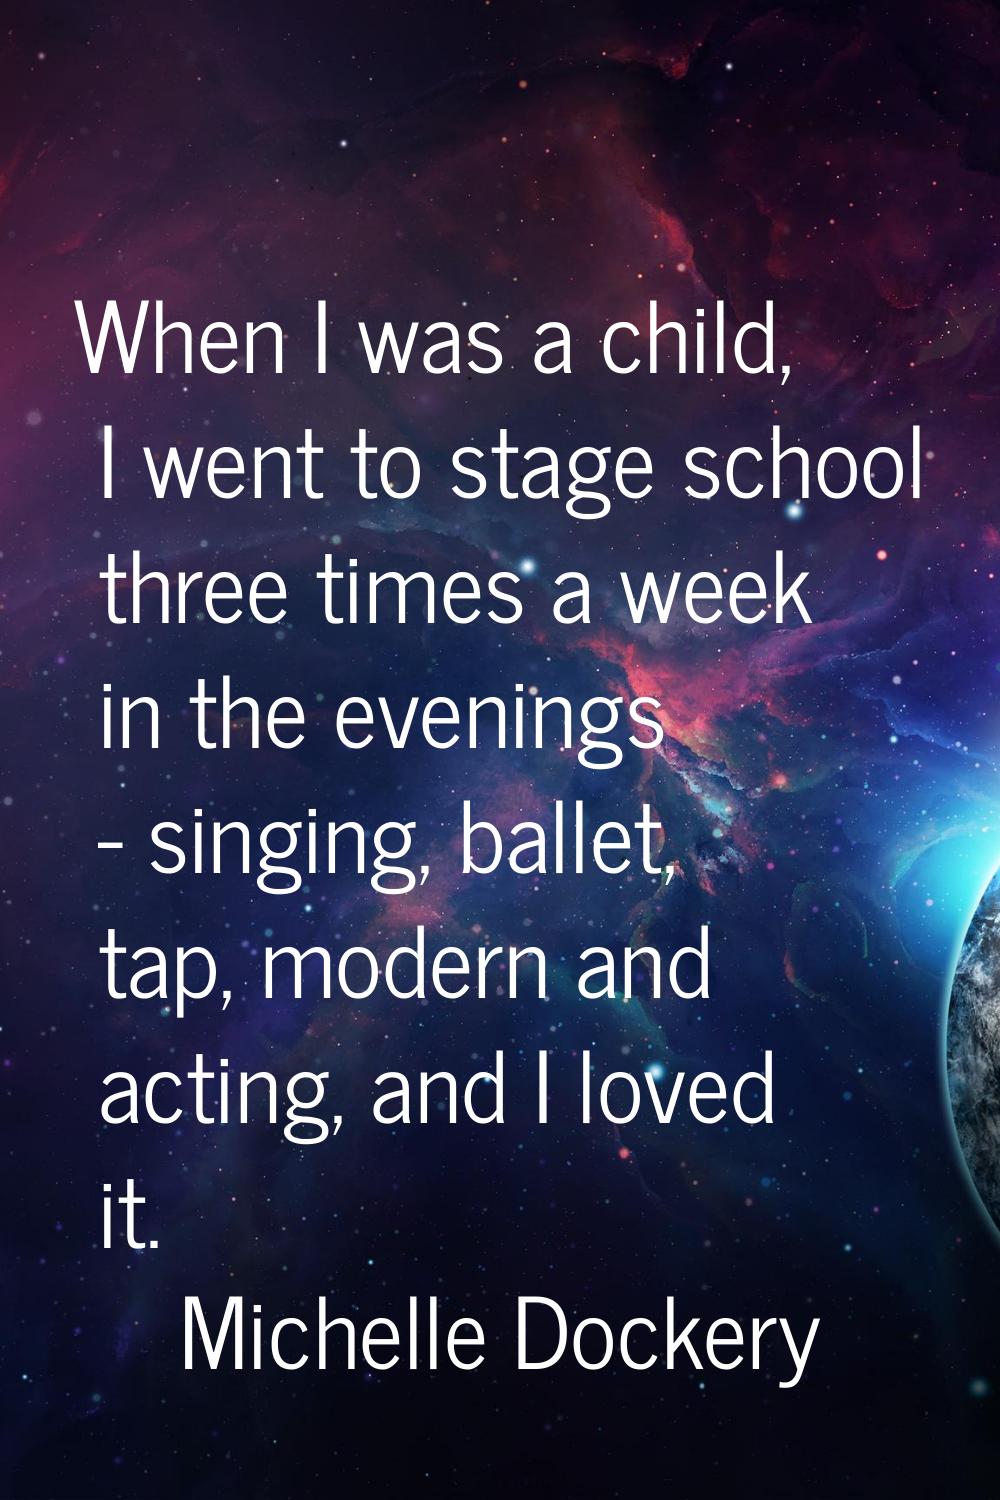 When I was a child, I went to stage school three times a week in the evenings - singing, ballet, ta